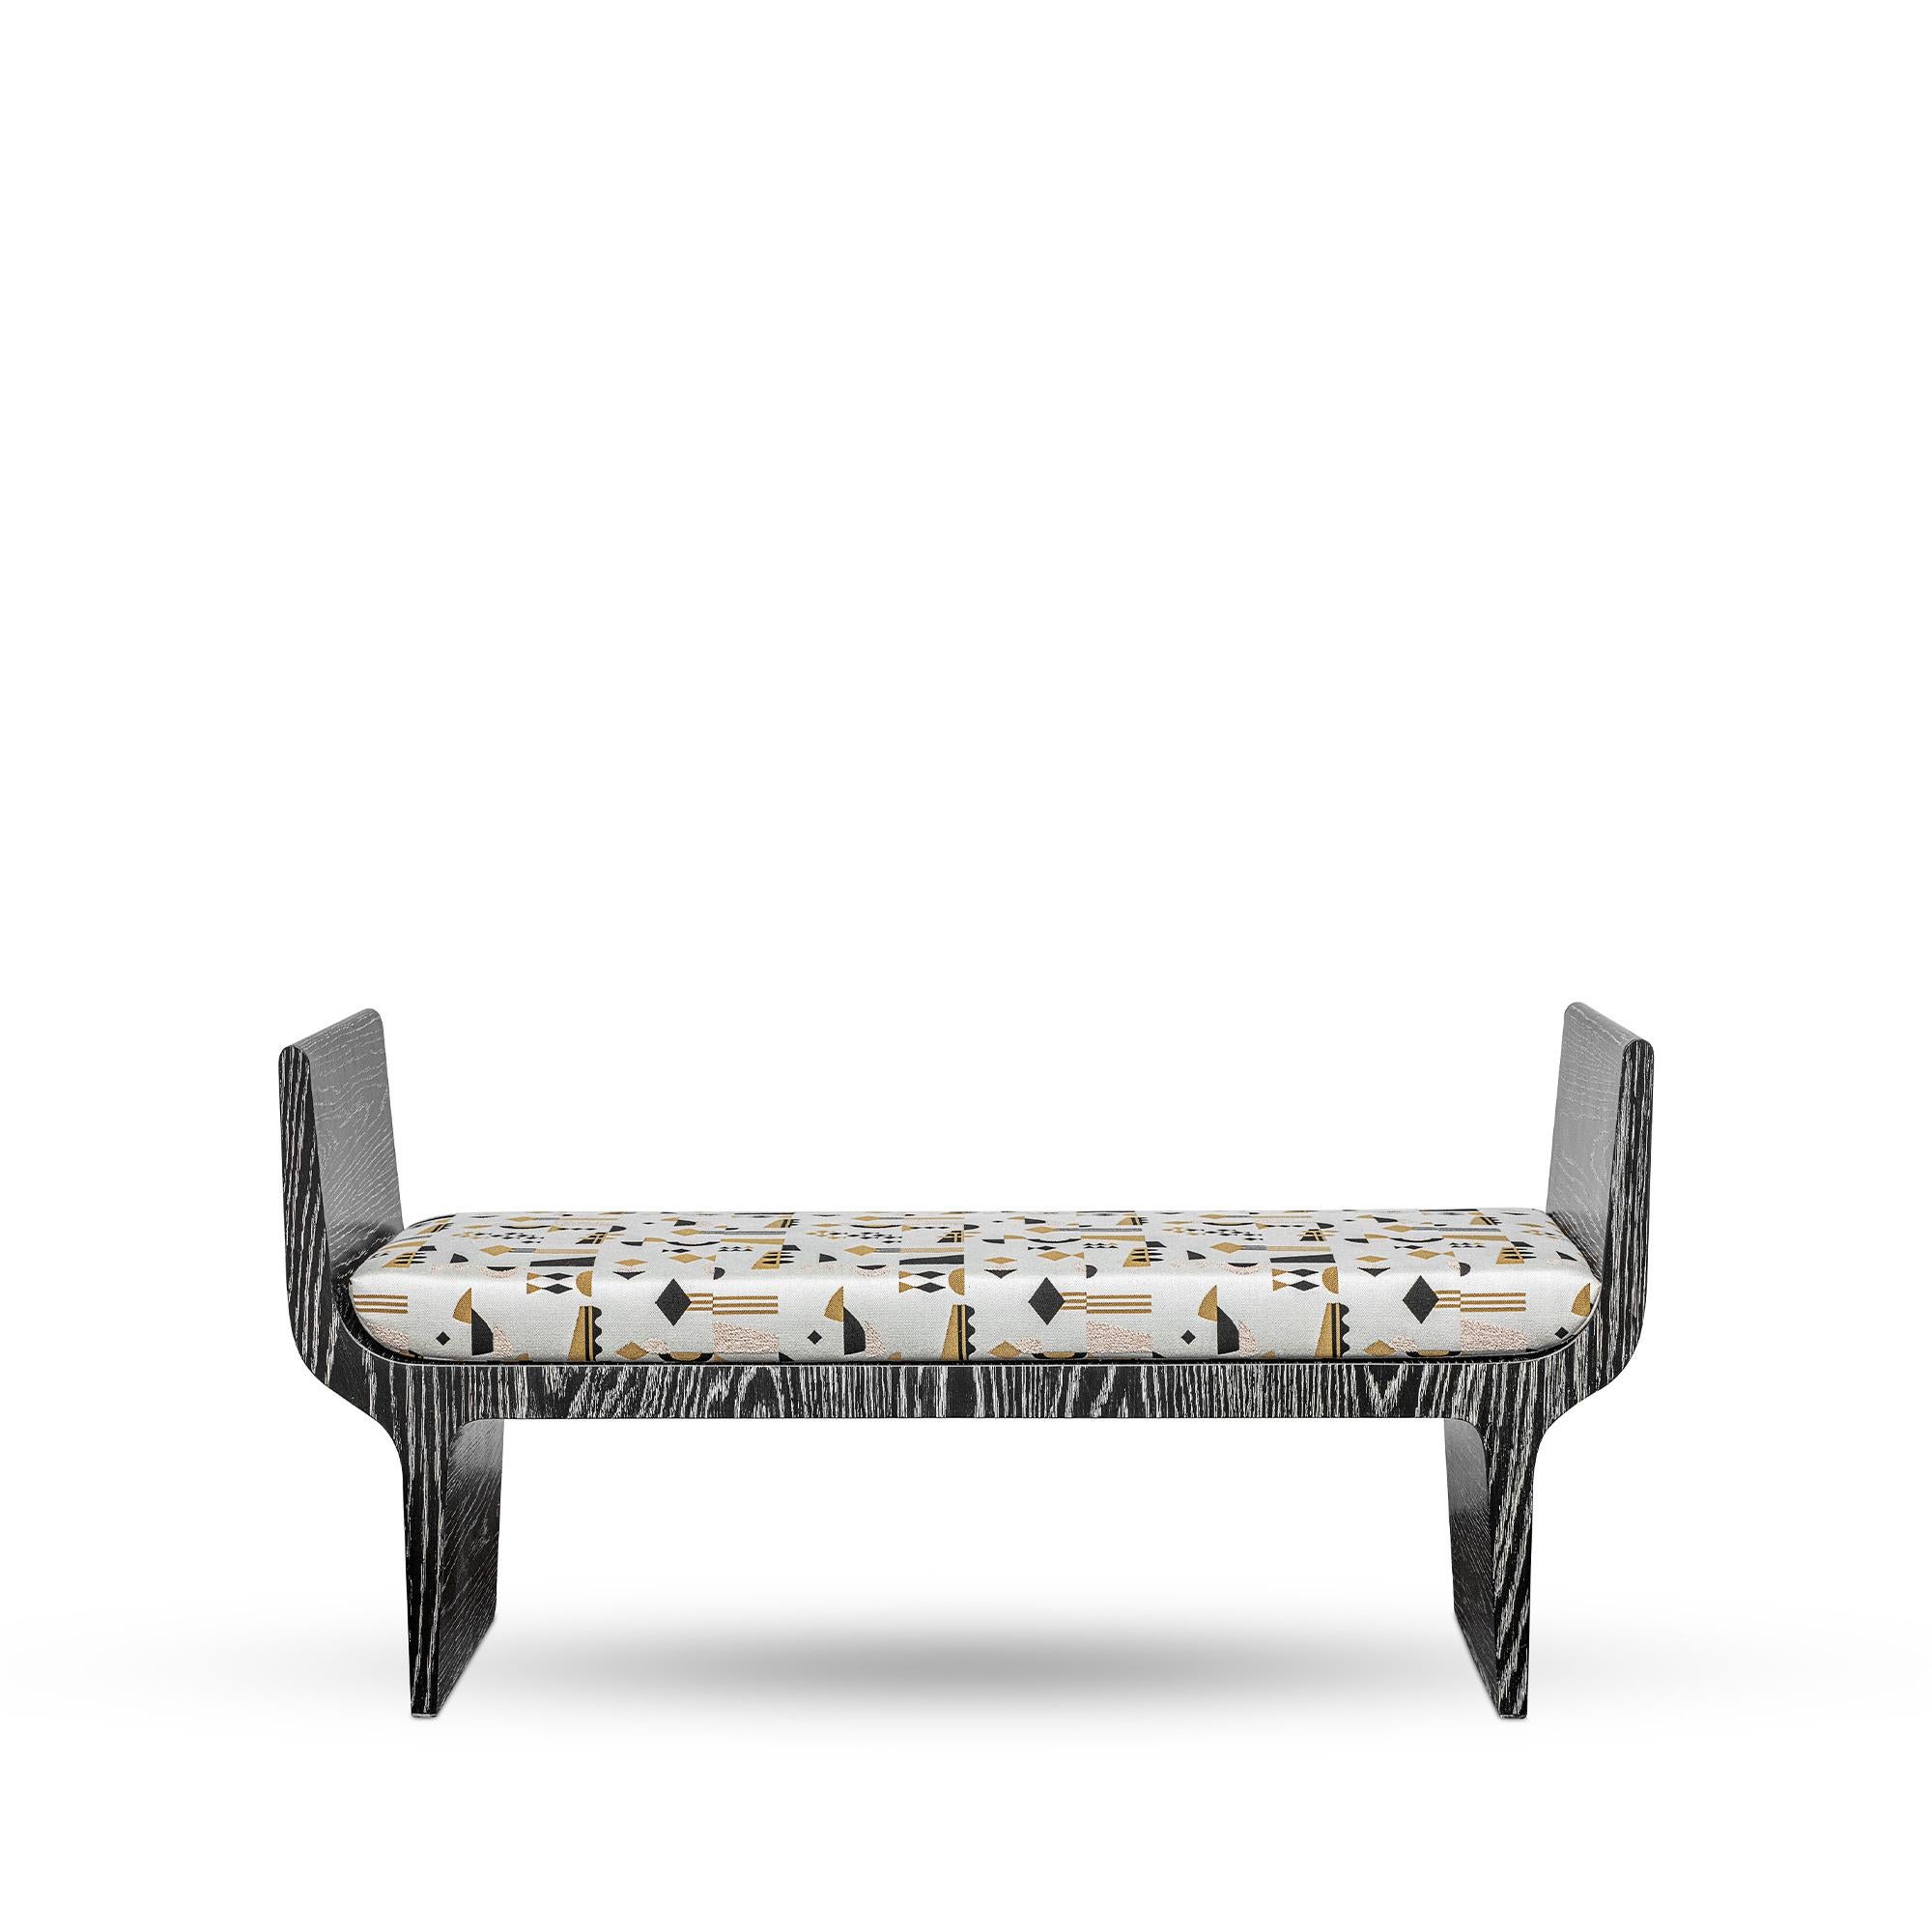 Copacabana Bench by Duistt
Dimensions: W 130 x D 40 x H 66 cm
Materials: Duistt Fabric Cushion, Black Limed Oak

The Copacabana bench, crafted with great attention to detail is part of the Copacabana collection inspired by the sidewalks of Rio de